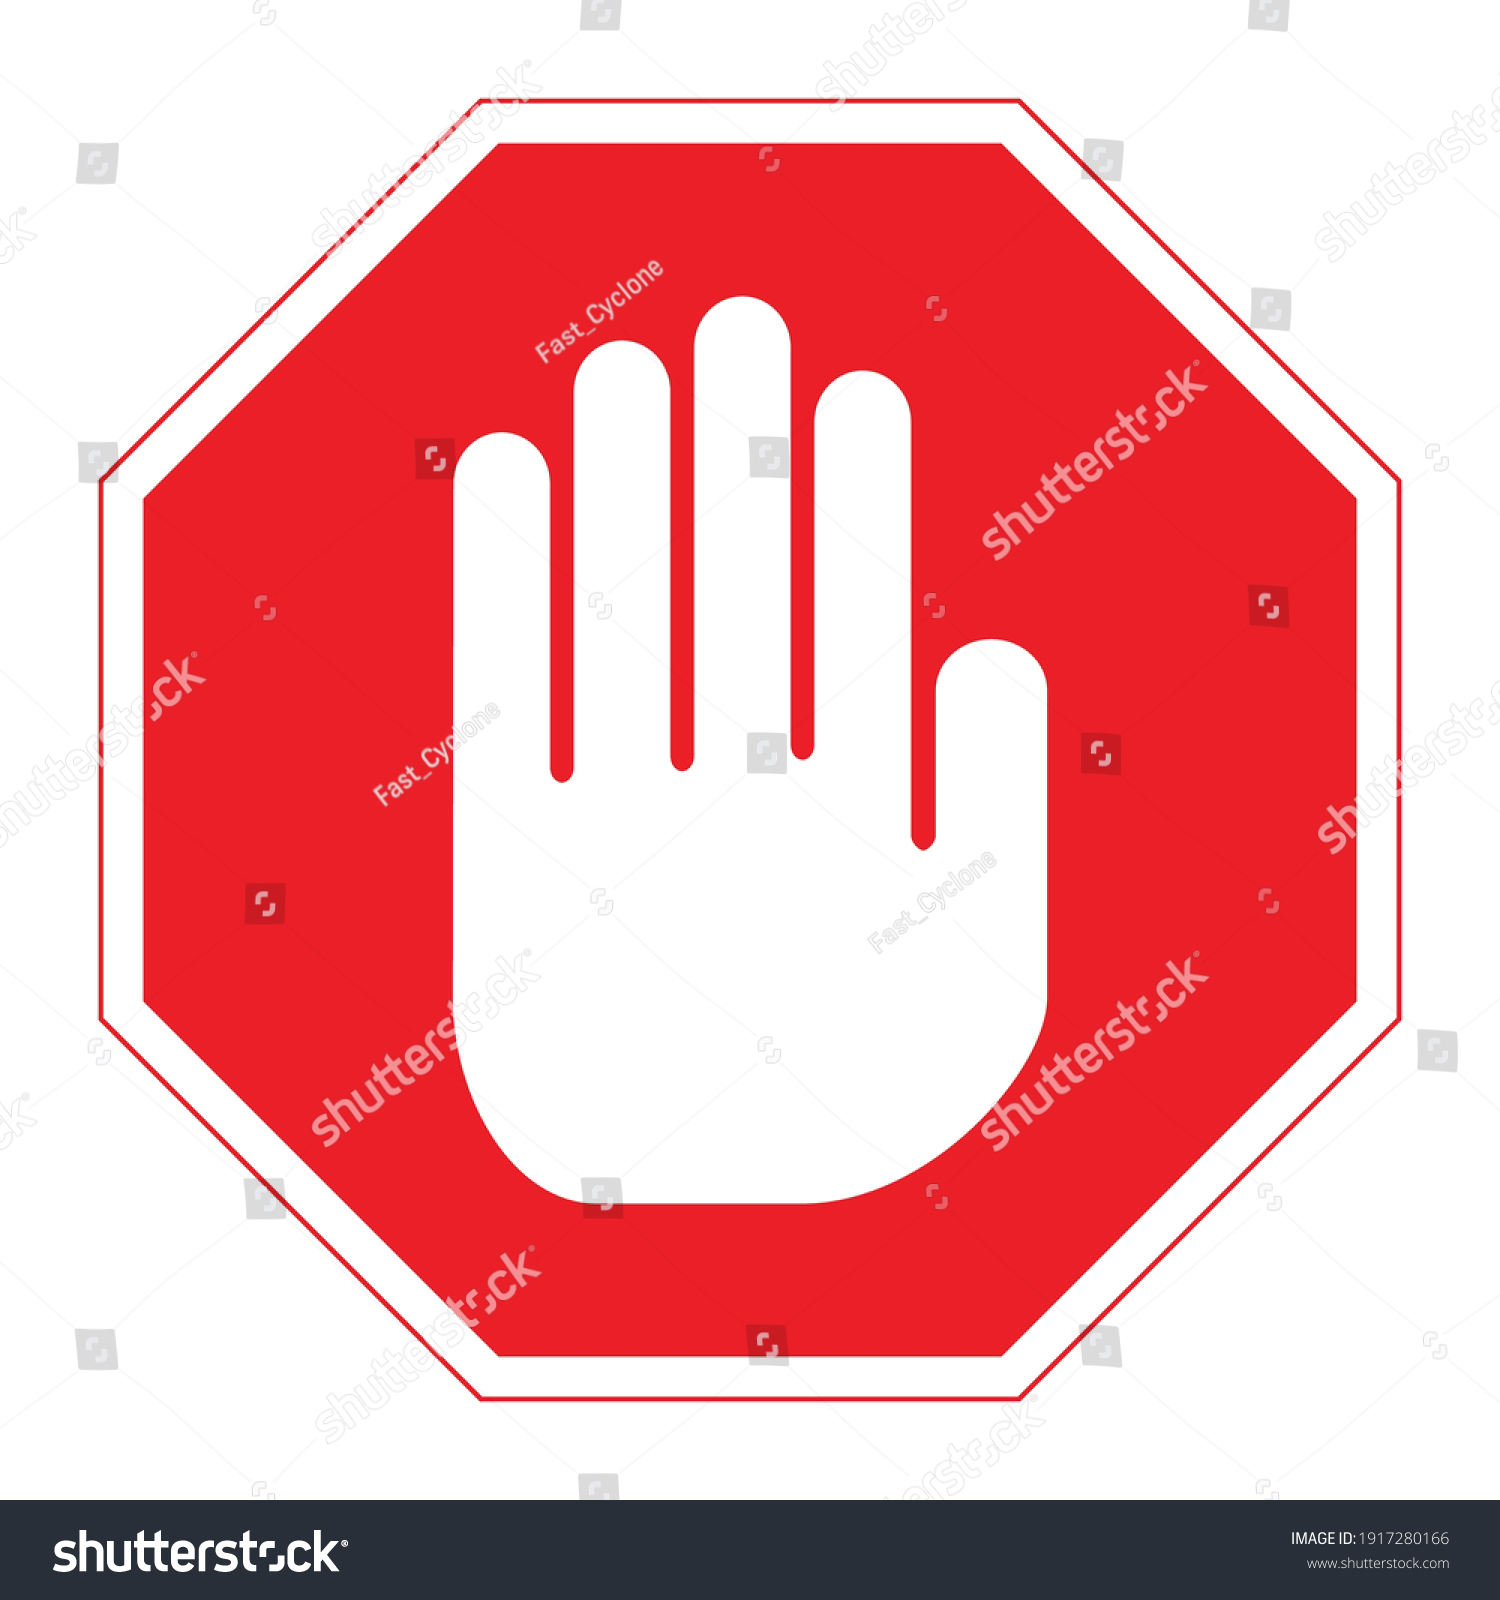 SVG of Red octagon STOP road sign with big white hand icon inside. Vector illustration of mandatory traffic sign. Absolute stop symbol for any purpose. Access denied. Do not enter. svg